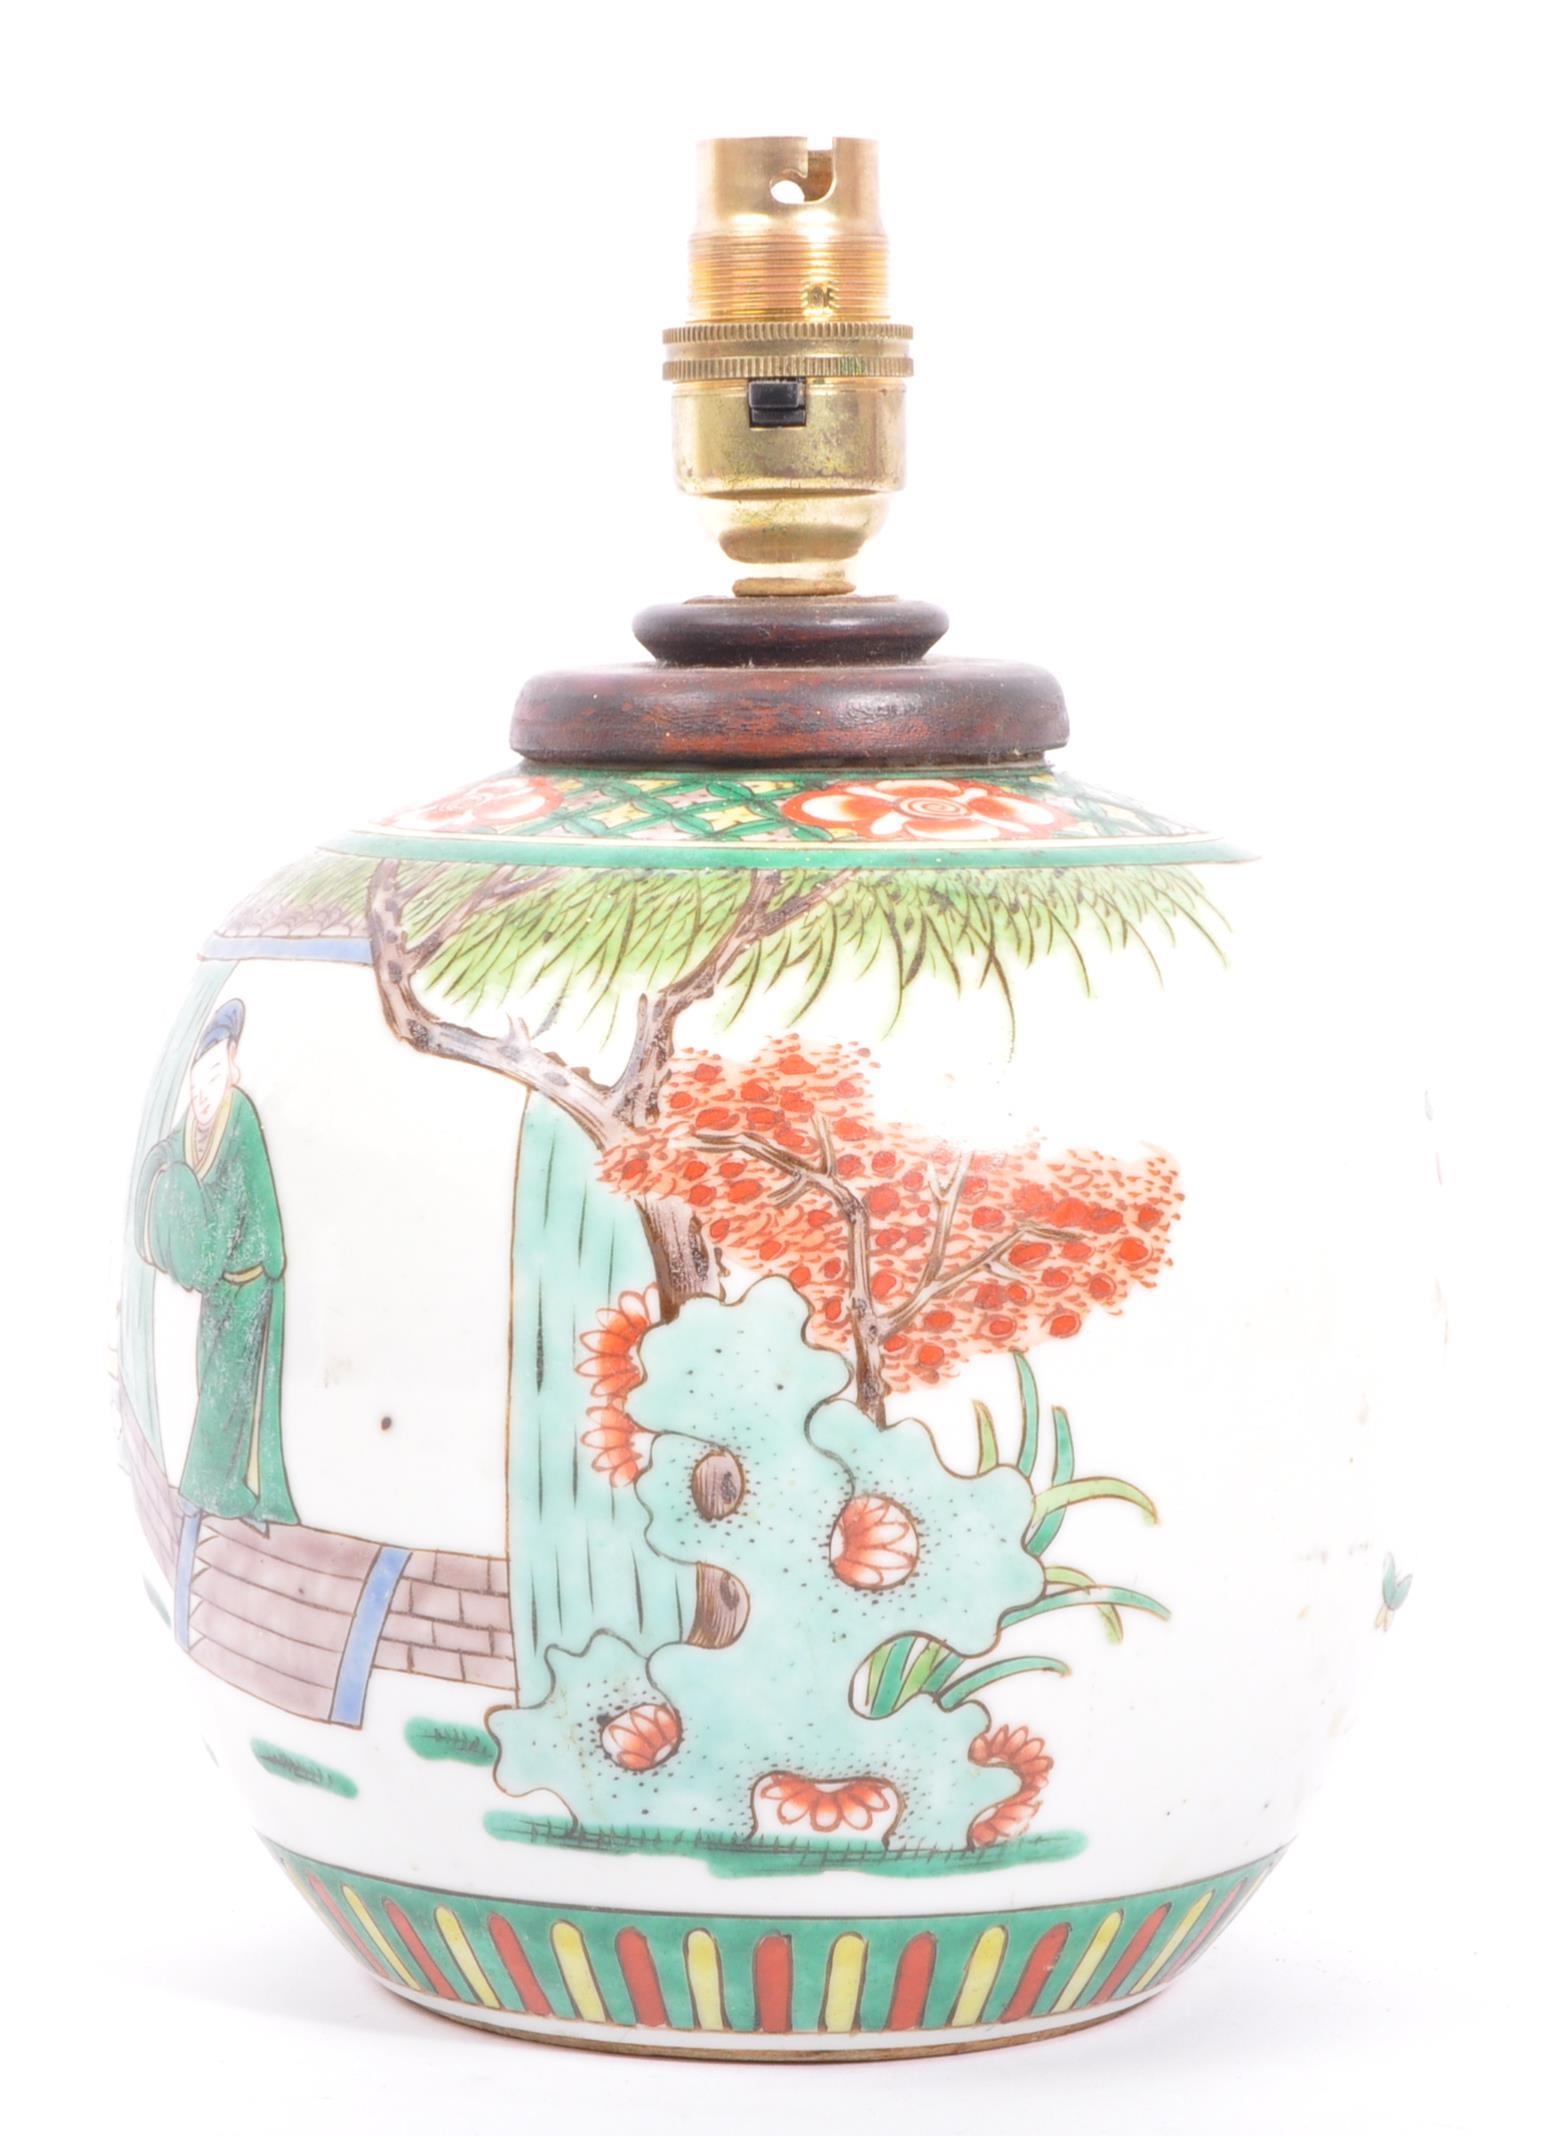 MID 20TH CENTURY FAMILLE ROSE HAND PAINTED VASE LAMP - Image 2 of 6